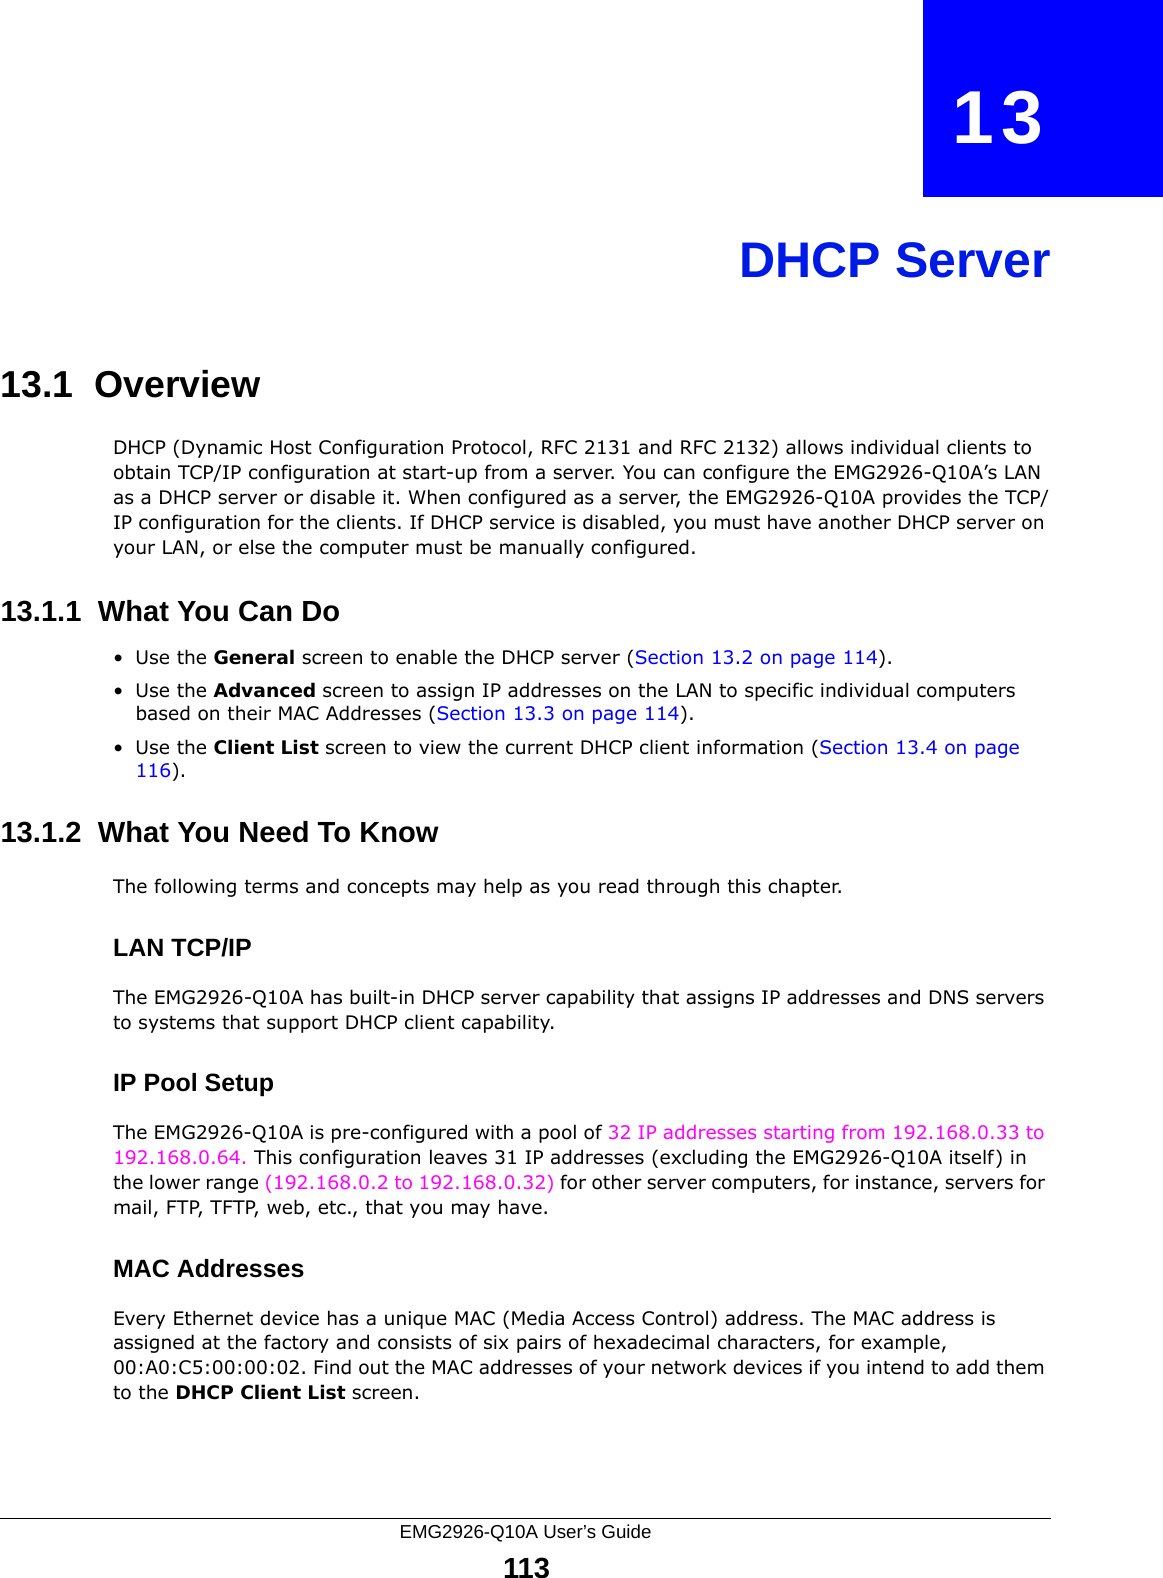 EMG2926-Q10A User’s Guide113CHAPTER   13DHCP Server13.1  OverviewDHCP (Dynamic Host Configuration Protocol, RFC 2131 and RFC 2132) allows individual clients to obtain TCP/IP configuration at start-up from a server. You can configure the EMG2926-Q10A’s LAN as a DHCP server or disable it. When configured as a server, the EMG2926-Q10A provides the TCP/IP configuration for the clients. If DHCP service is disabled, you must have another DHCP server on your LAN, or else the computer must be manually configured.13.1.1  What You Can Do•Use the General screen to enable the DHCP server (Section 13.2 on page 114).•Use the Advanced screen to assign IP addresses on the LAN to specific individual computers based on their MAC Addresses (Section 13.3 on page 114).•Use the Client List screen to view the current DHCP client information (Section 13.4 on page 116). 13.1.2  What You Need To KnowThe following terms and concepts may help as you read through this chapter.LAN TCP/IP The EMG2926-Q10A has built-in DHCP server capability that assigns IP addresses and DNS servers to systems that support DHCP client capability.IP Pool SetupThe EMG2926-Q10A is pre-configured with a pool of 32 IP addresses starting from 192.168.0.33 to 192.168.0.64. This configuration leaves 31 IP addresses (excluding the EMG2926-Q10A itself) in the lower range (192.168.0.2 to 192.168.0.32) for other server computers, for instance, servers for mail, FTP, TFTP, web, etc., that you may have.MAC AddressesEvery Ethernet device has a unique MAC (Media Access Control) address. The MAC address is assigned at the factory and consists of six pairs of hexadecimal characters, for example, 00:A0:C5:00:00:02. Find out the MAC addresses of your network devices if you intend to add them to the DHCP Client List screen.